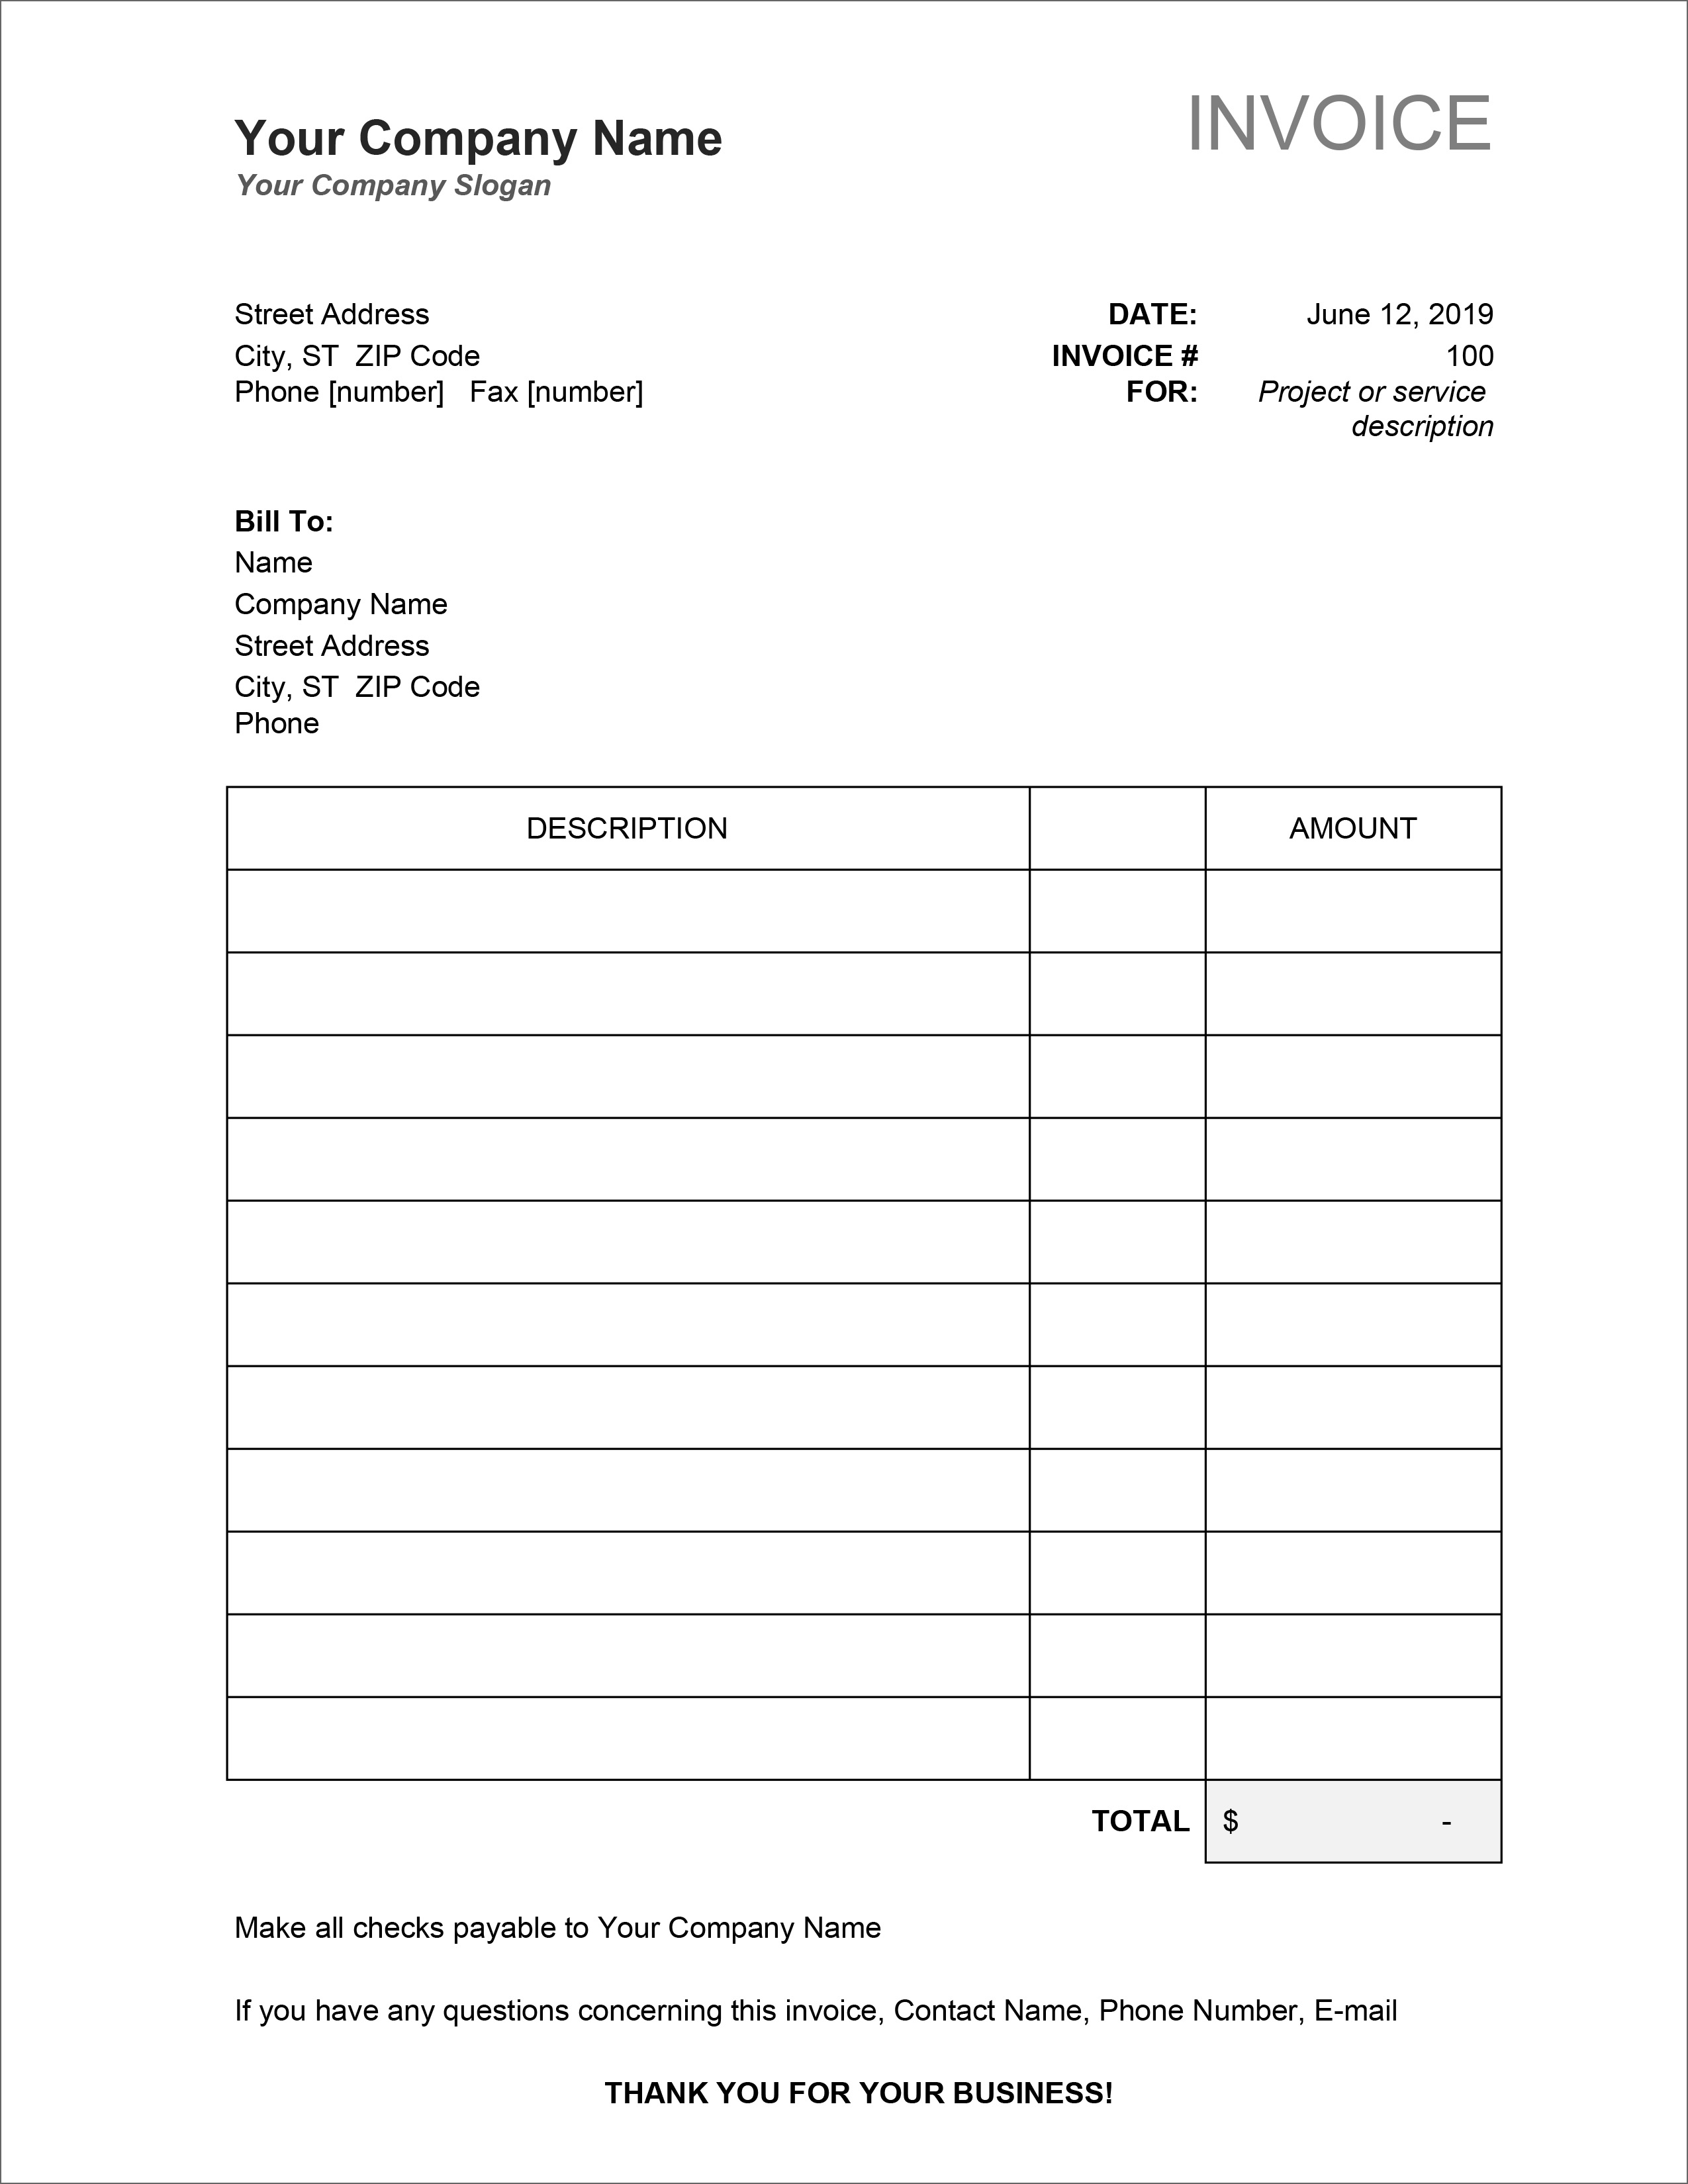 23 Free Invoice Templates In Microsoft Excel And DOCX Formats Intended For Microsoft Invoices Templates Free